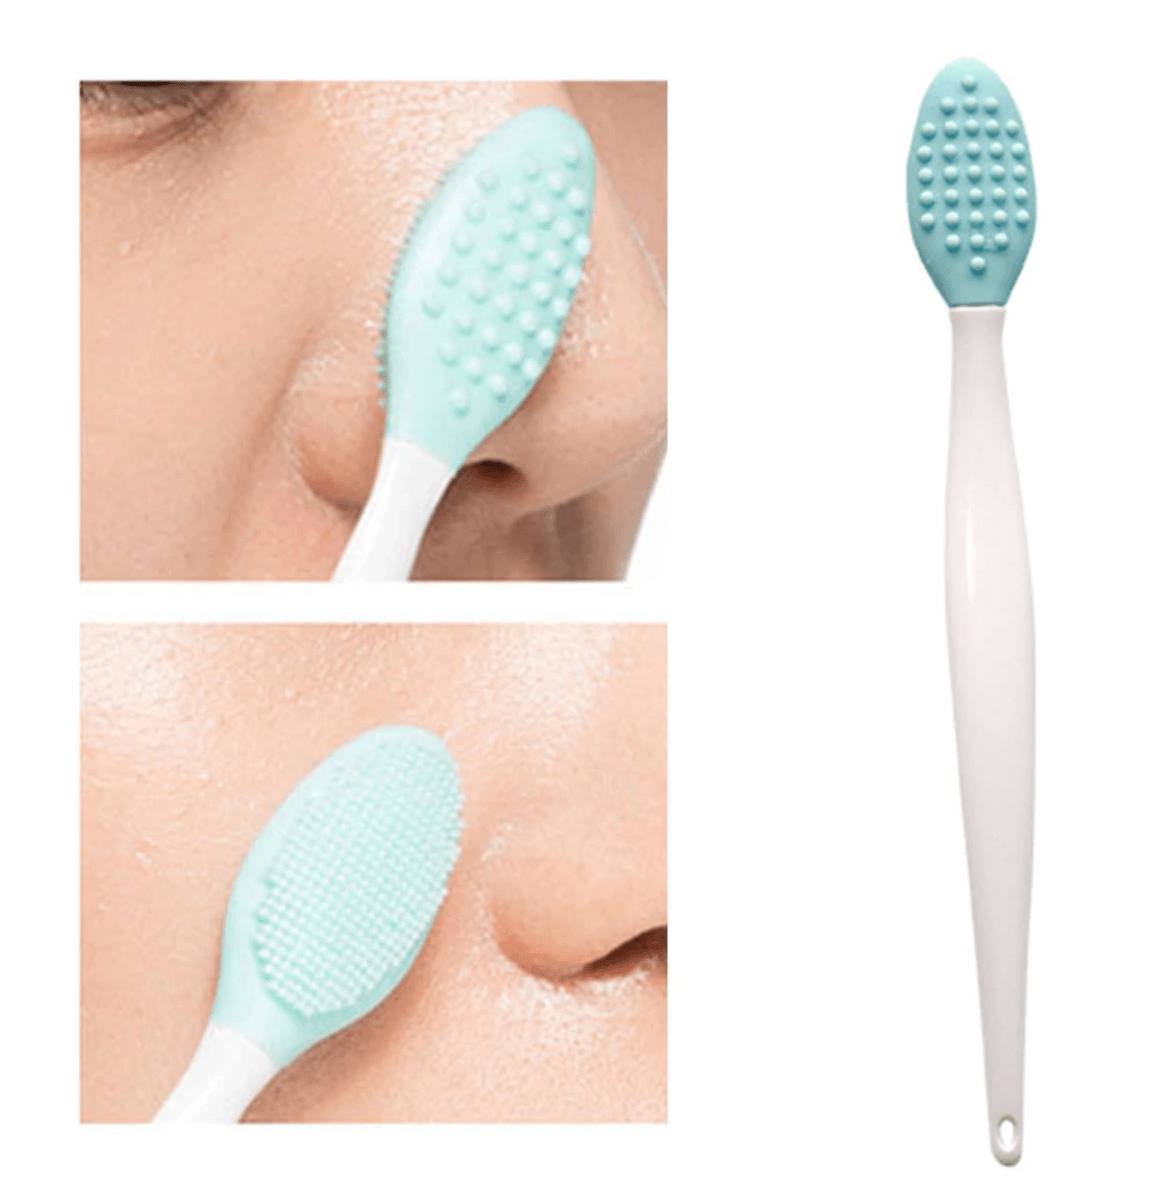 Nose Clean Blackhead Removal Silicone Brush Tool - Green - Glowish